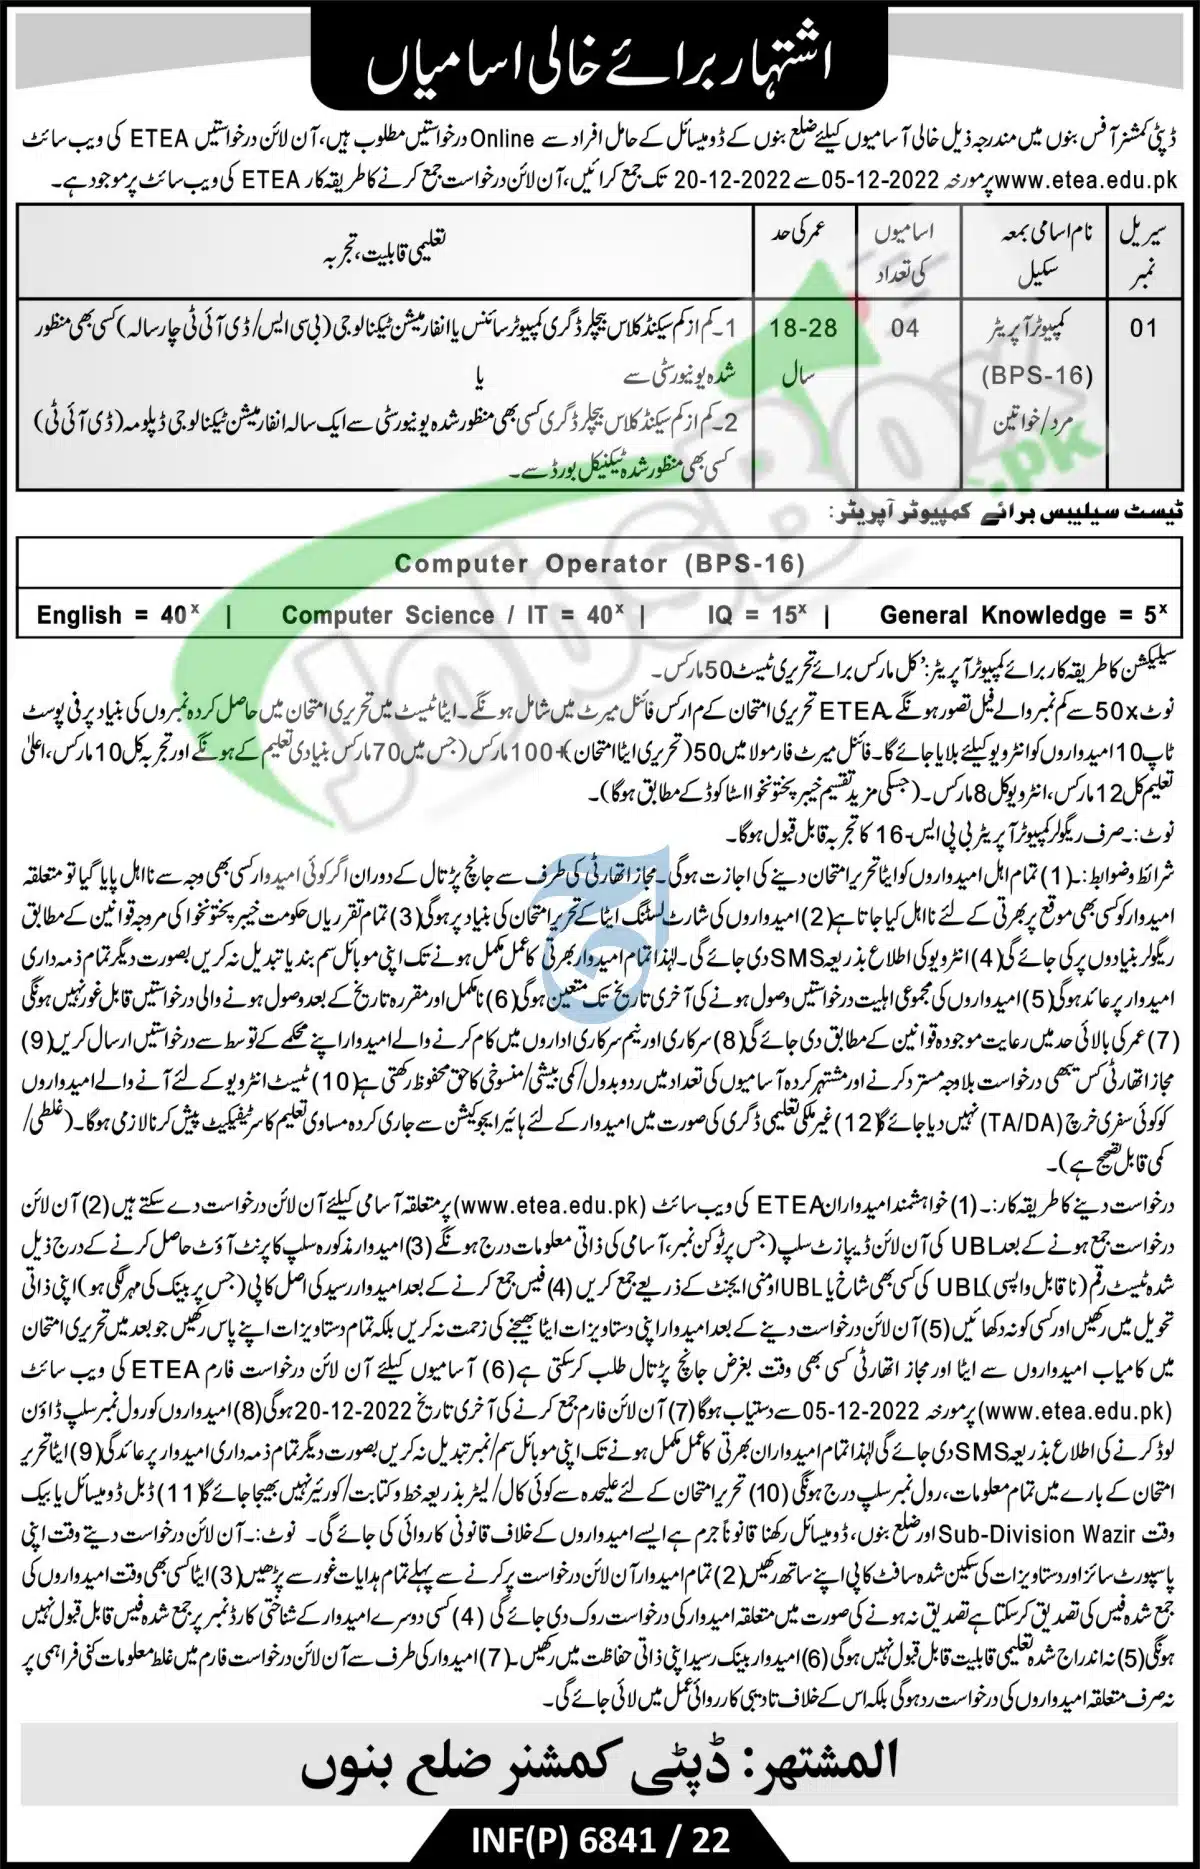 Deputy Commissioner Office Bannu Jobs 2022 For Computer Operator